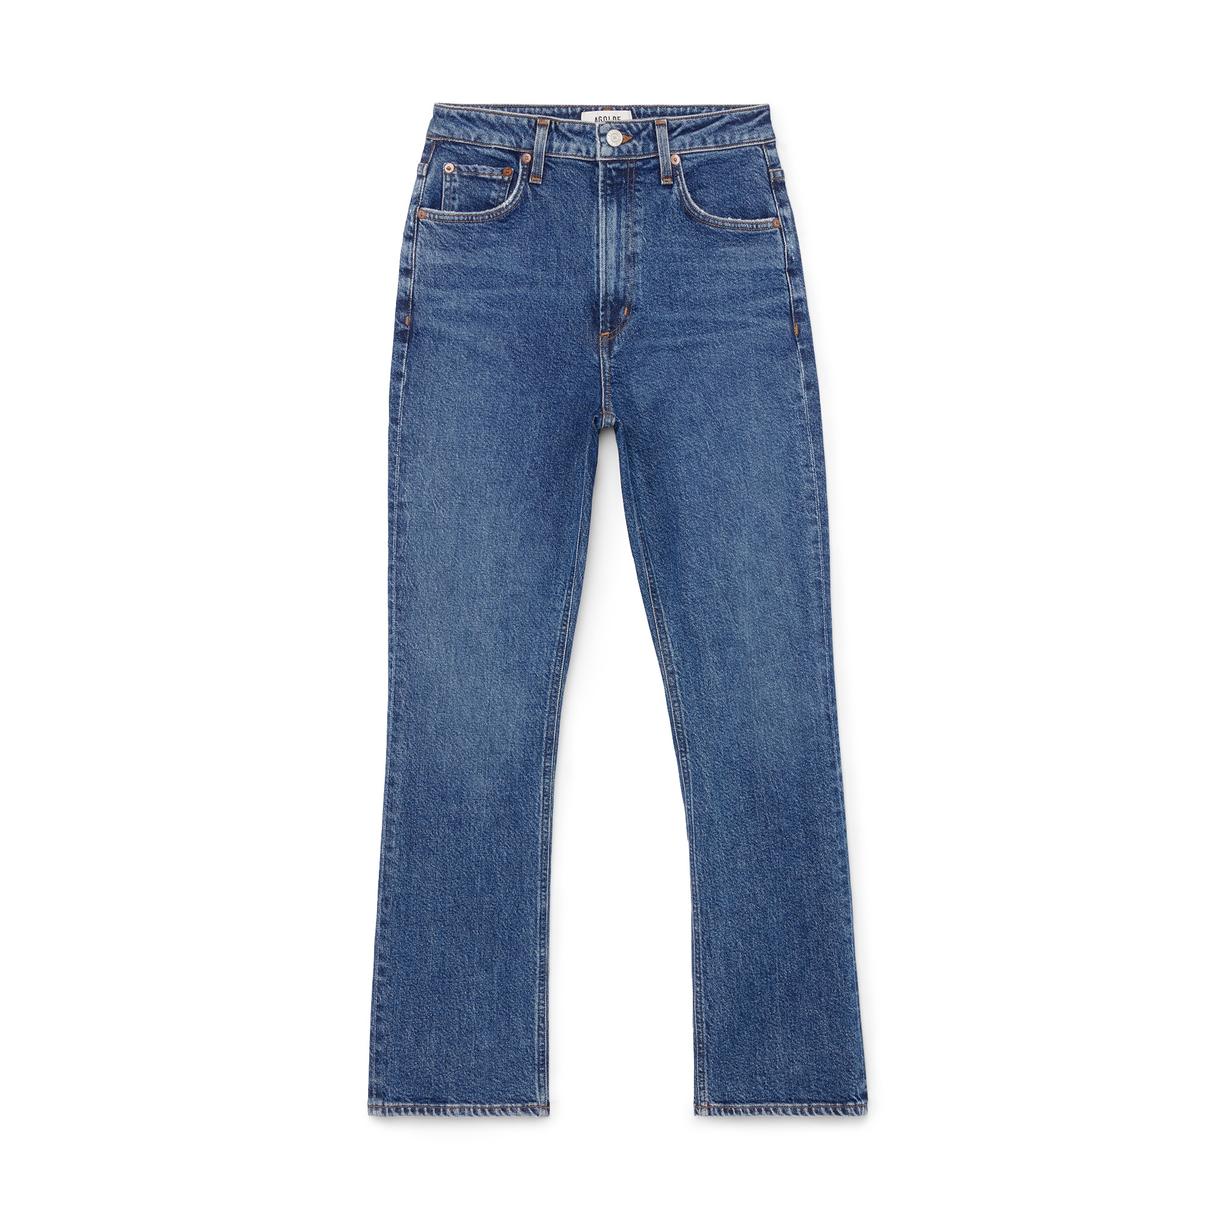 AGOLDE Vintage High-Rise Bootcut Jeans